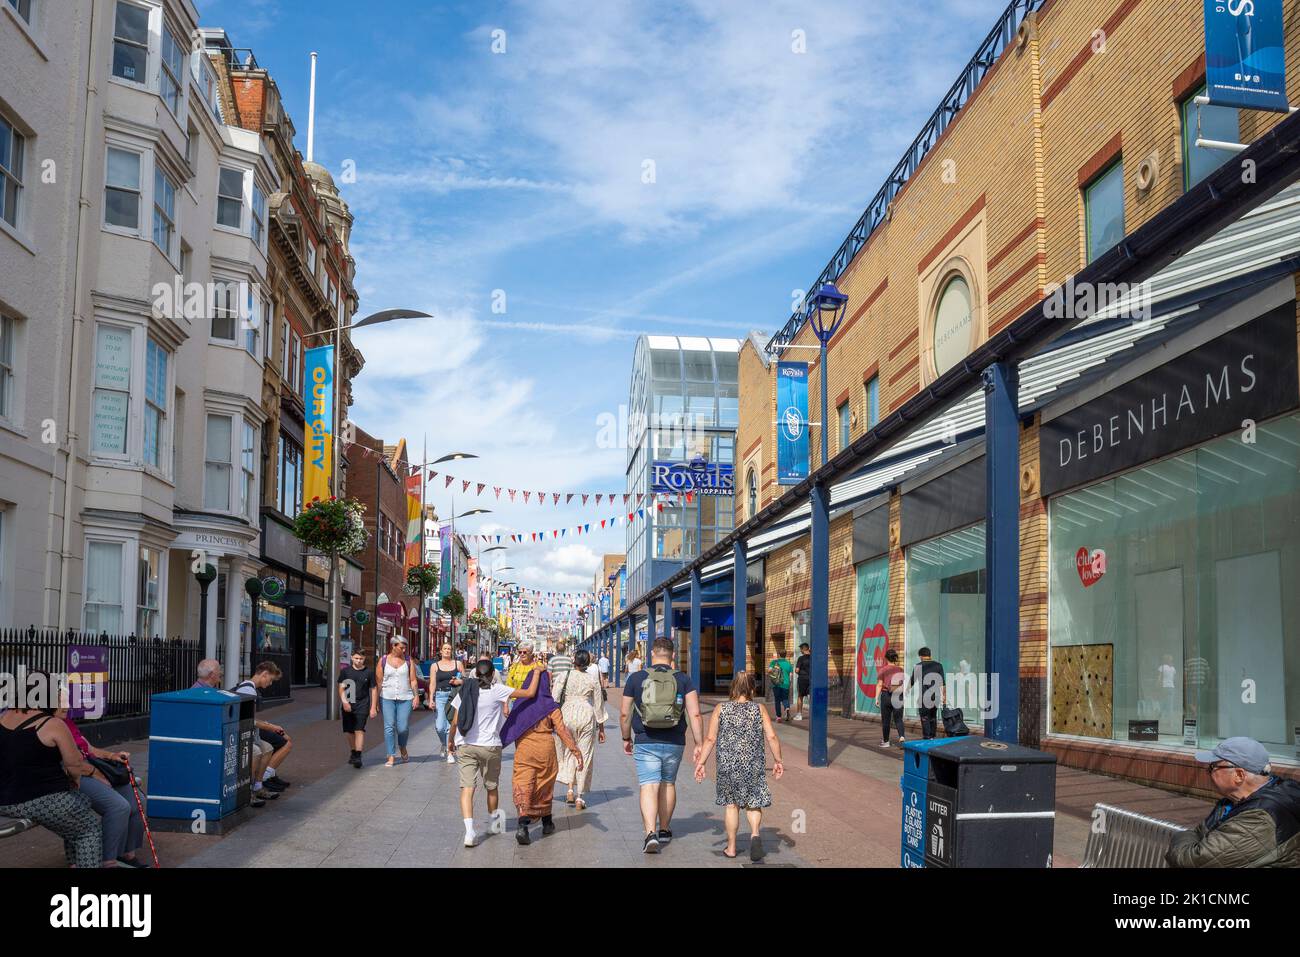 Southend on Sea High Street. New City in Essex. Retail pedestrianised area with shops. Closed Debenhams store in Royals shopping centre Stock Photo